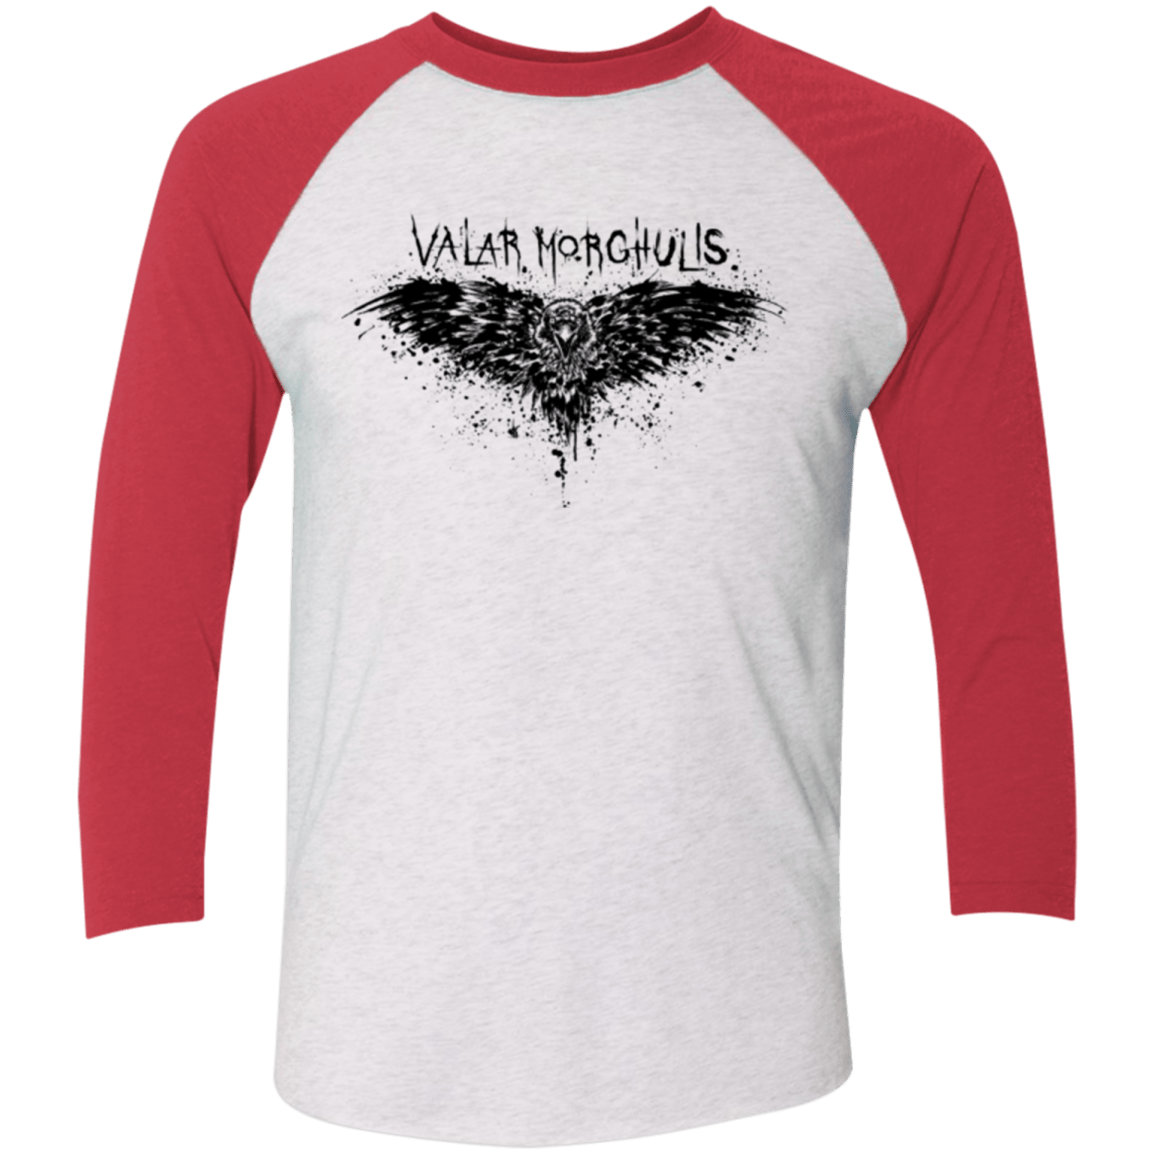 T-Shirts Heather White/Vintage Red / X-Small Valar Morghulis Men's Triblend 3/4 Sleeve